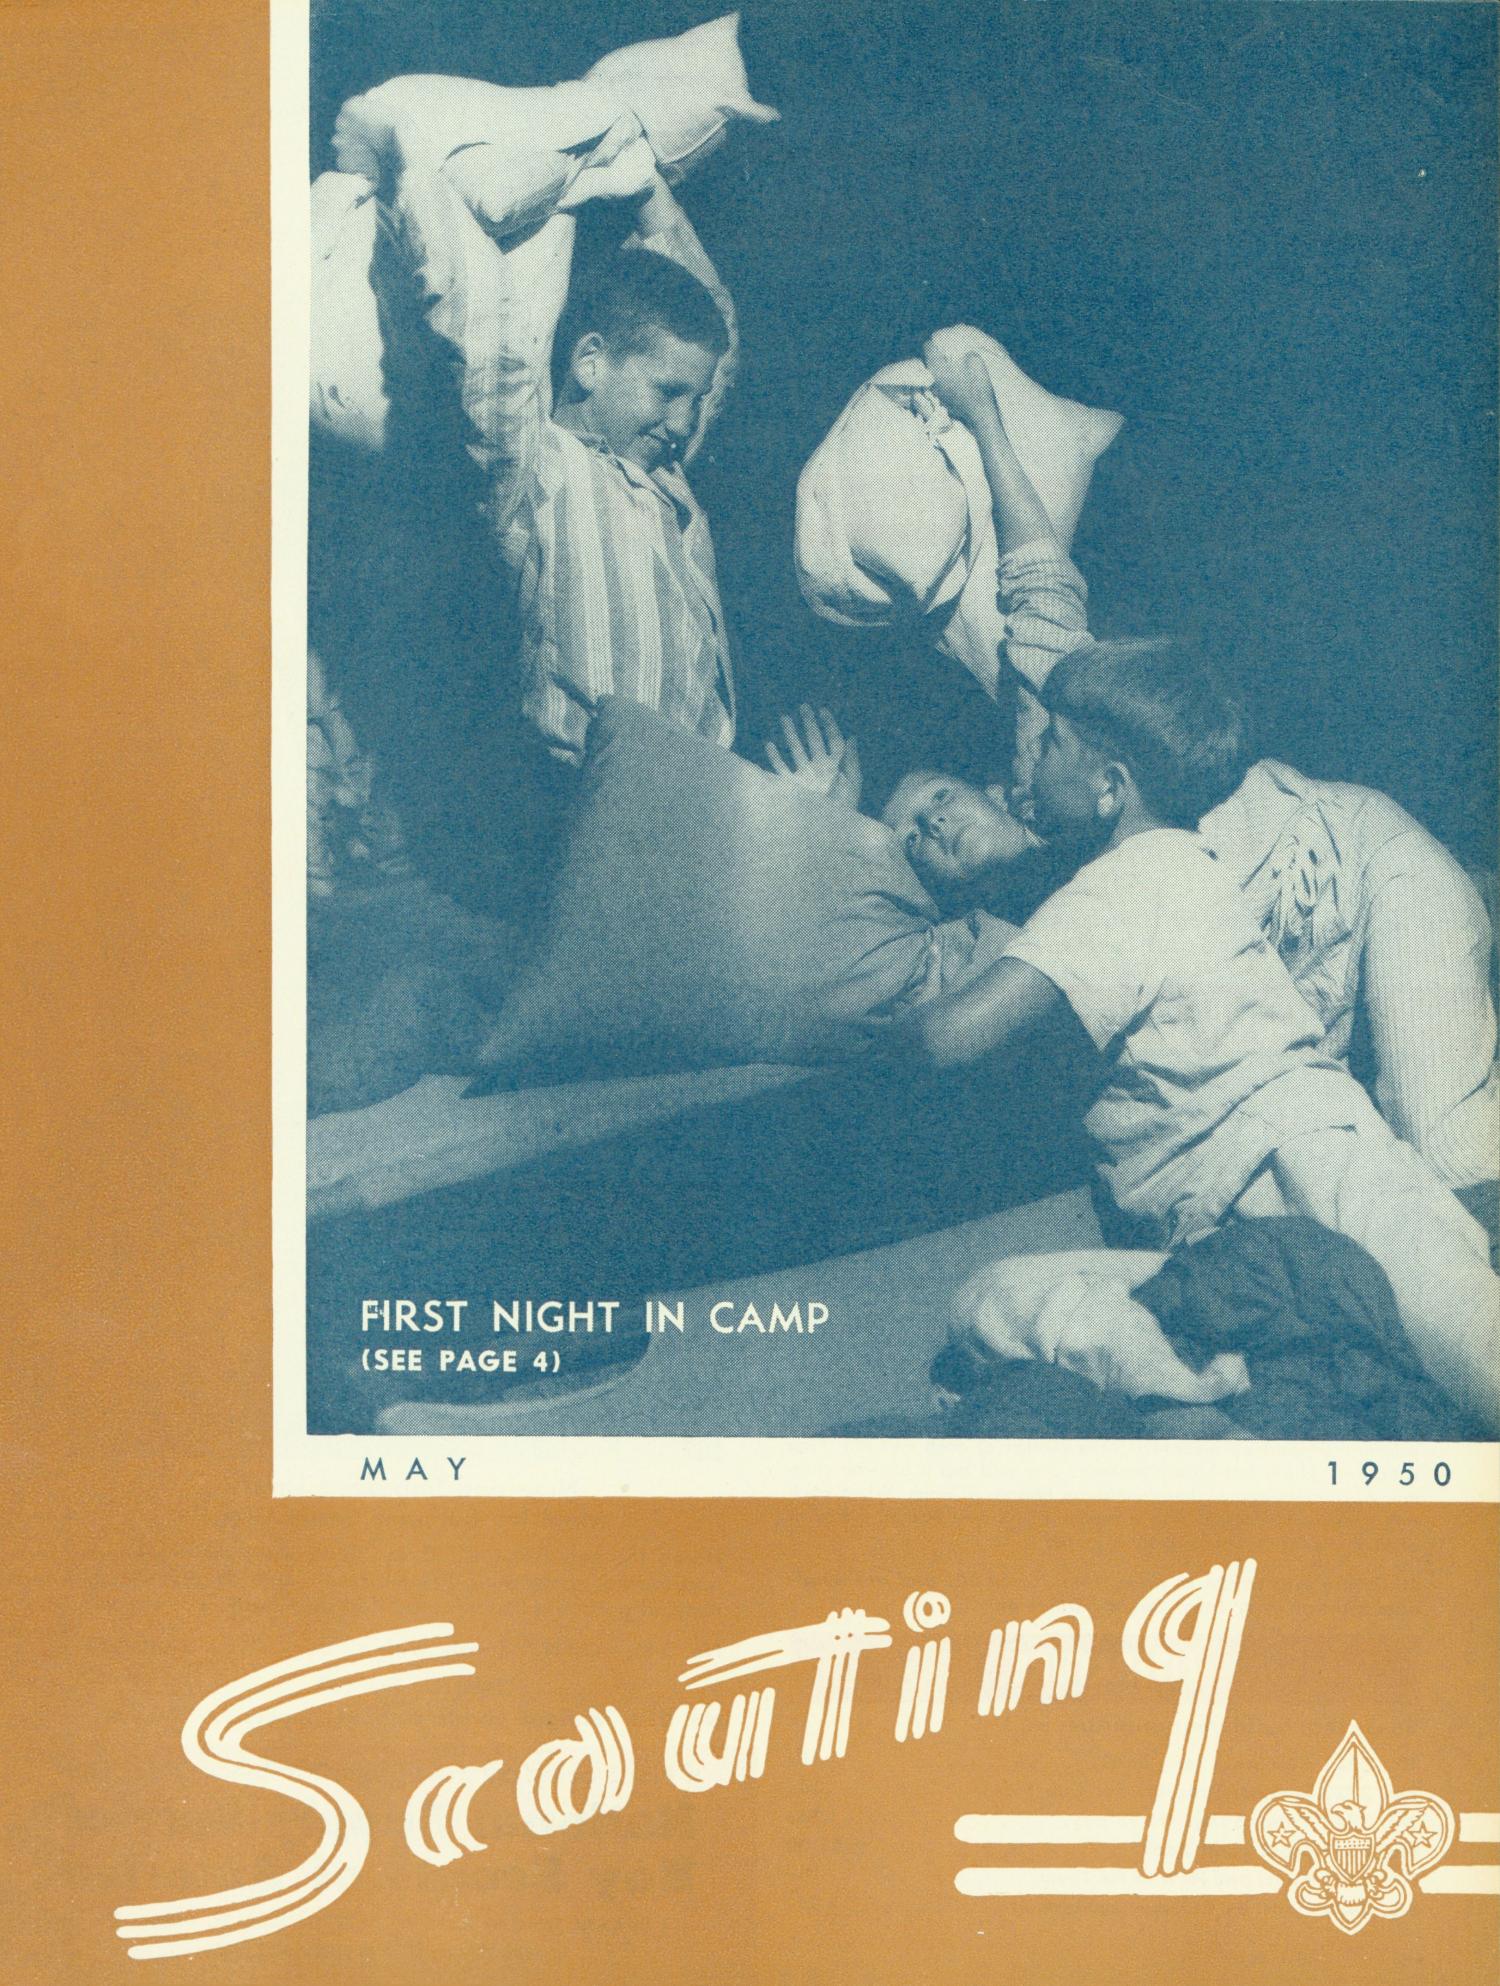 Scouting, Volume 38, Number 5, May 1950
                                                
                                                    Front Cover
                                                